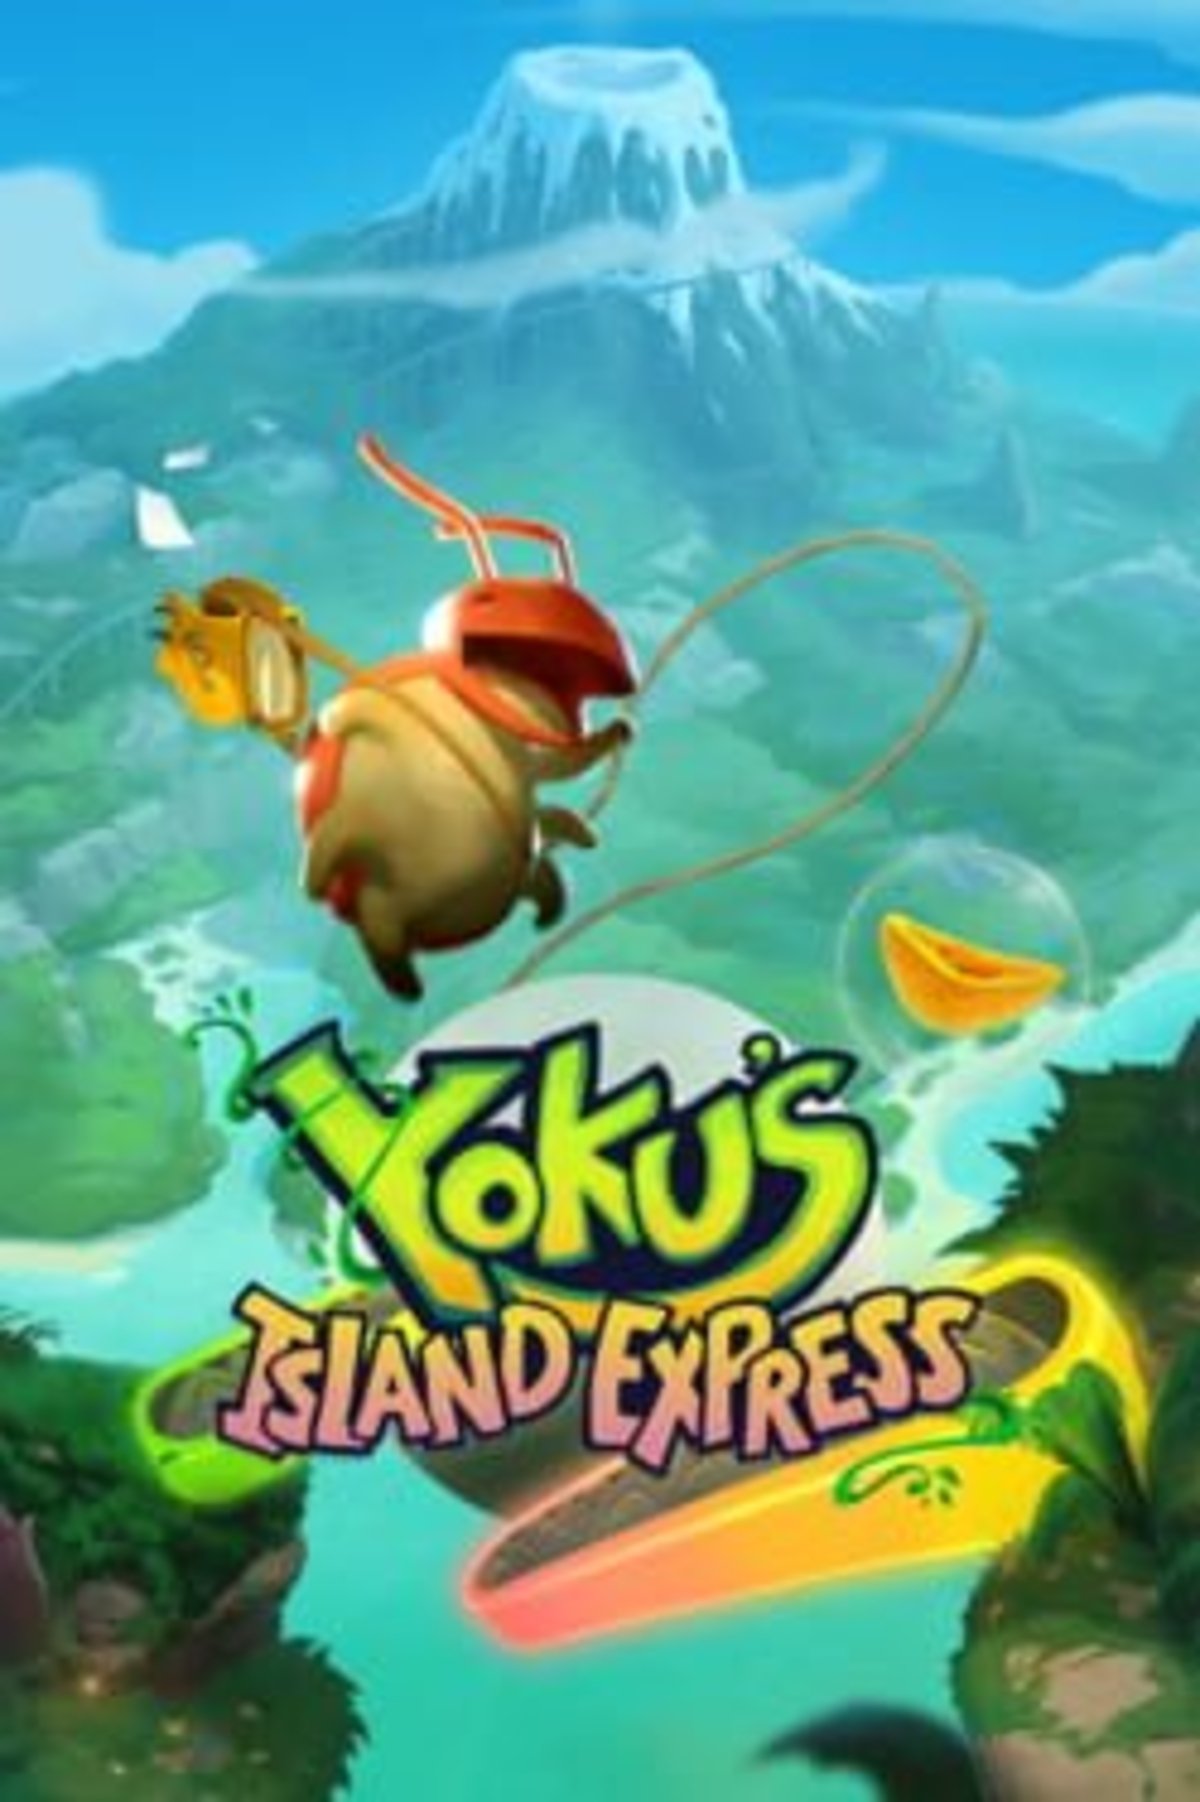 Download Yoku's Island Express now totally free on the Epic Games Store